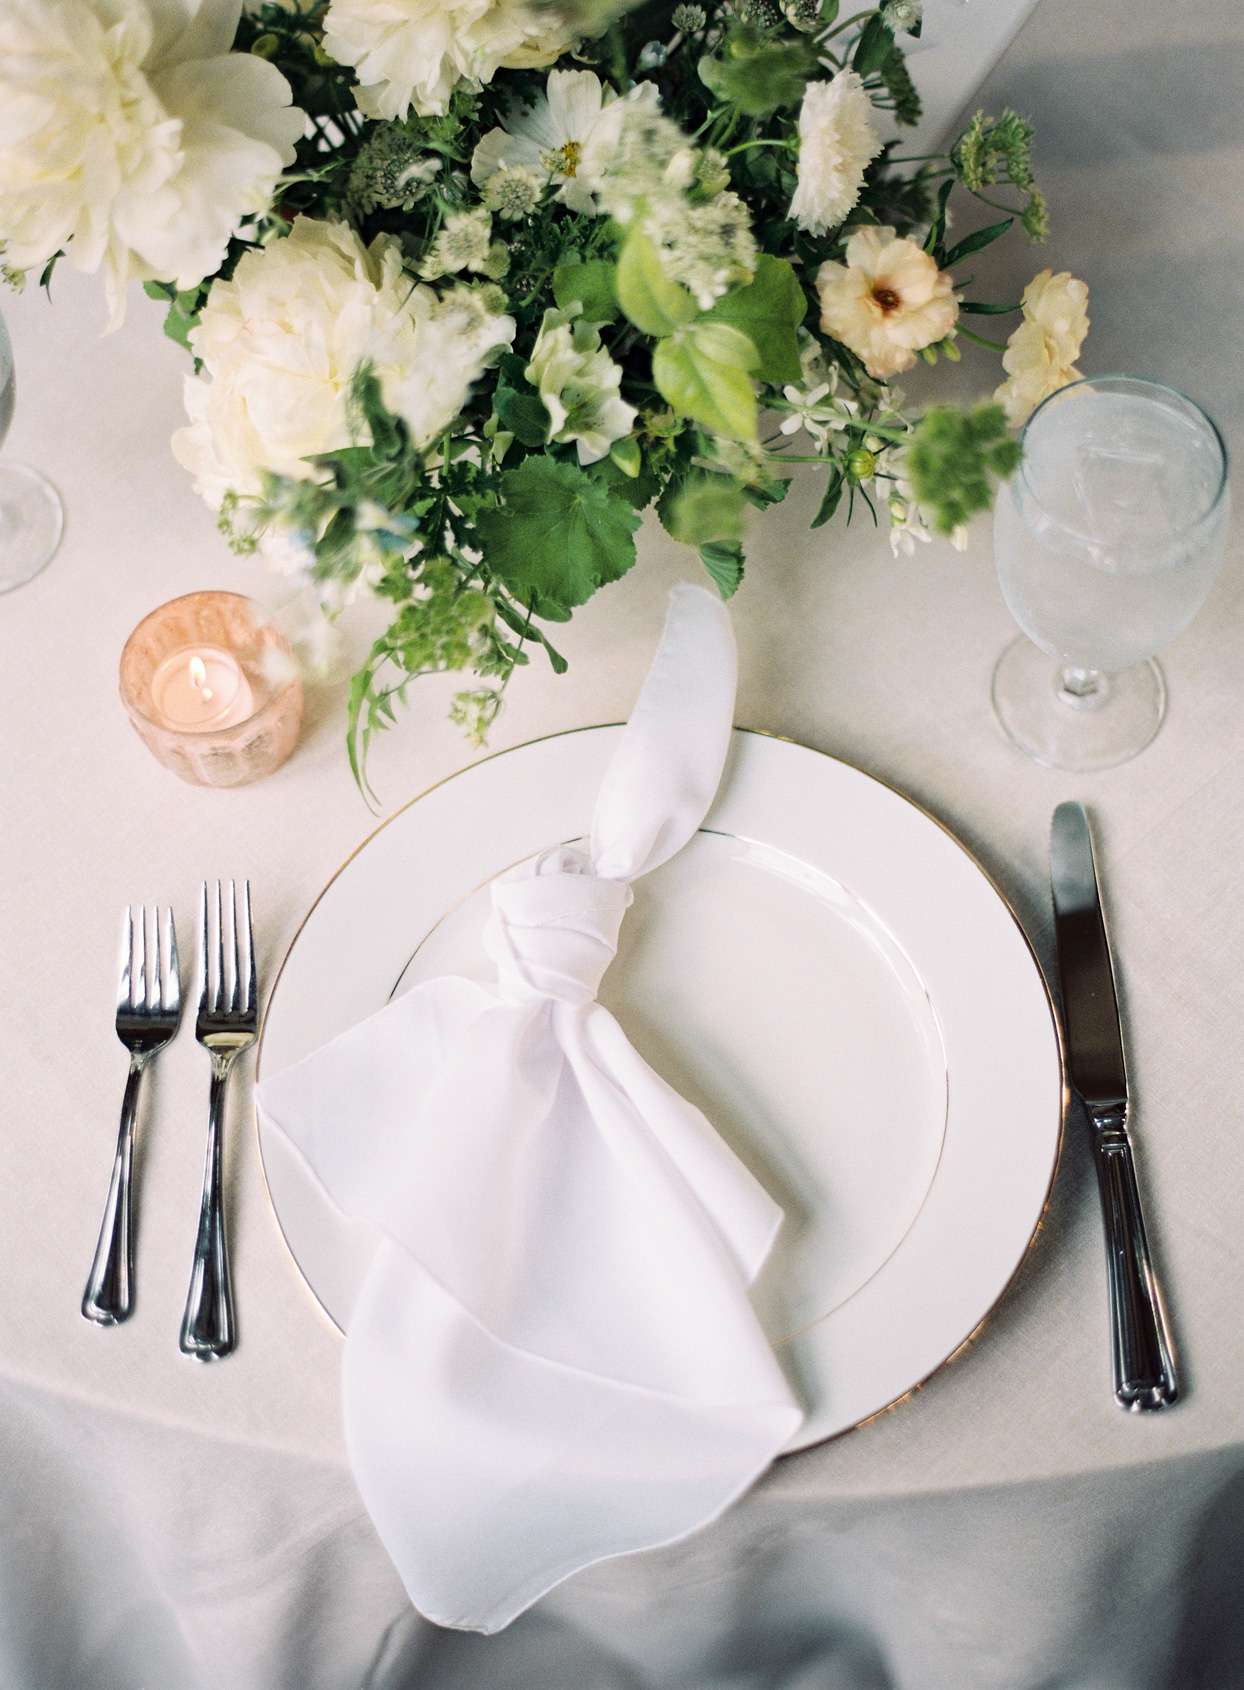 dinner place setting with white napkin and flowers